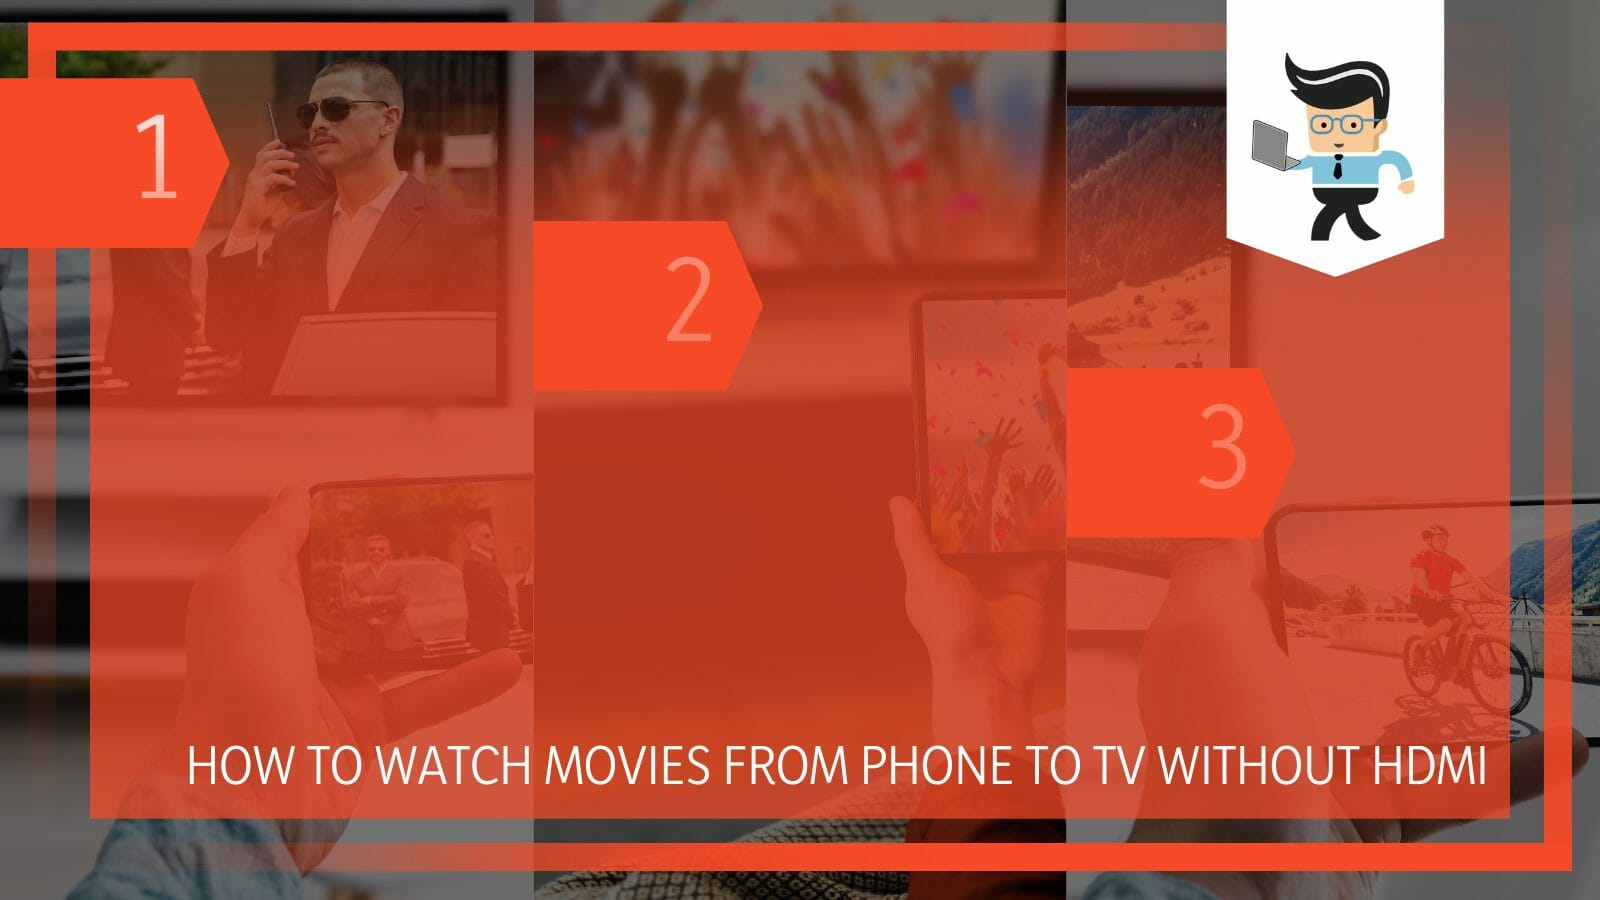 Watch Movies From Phone To TV Without HDMI